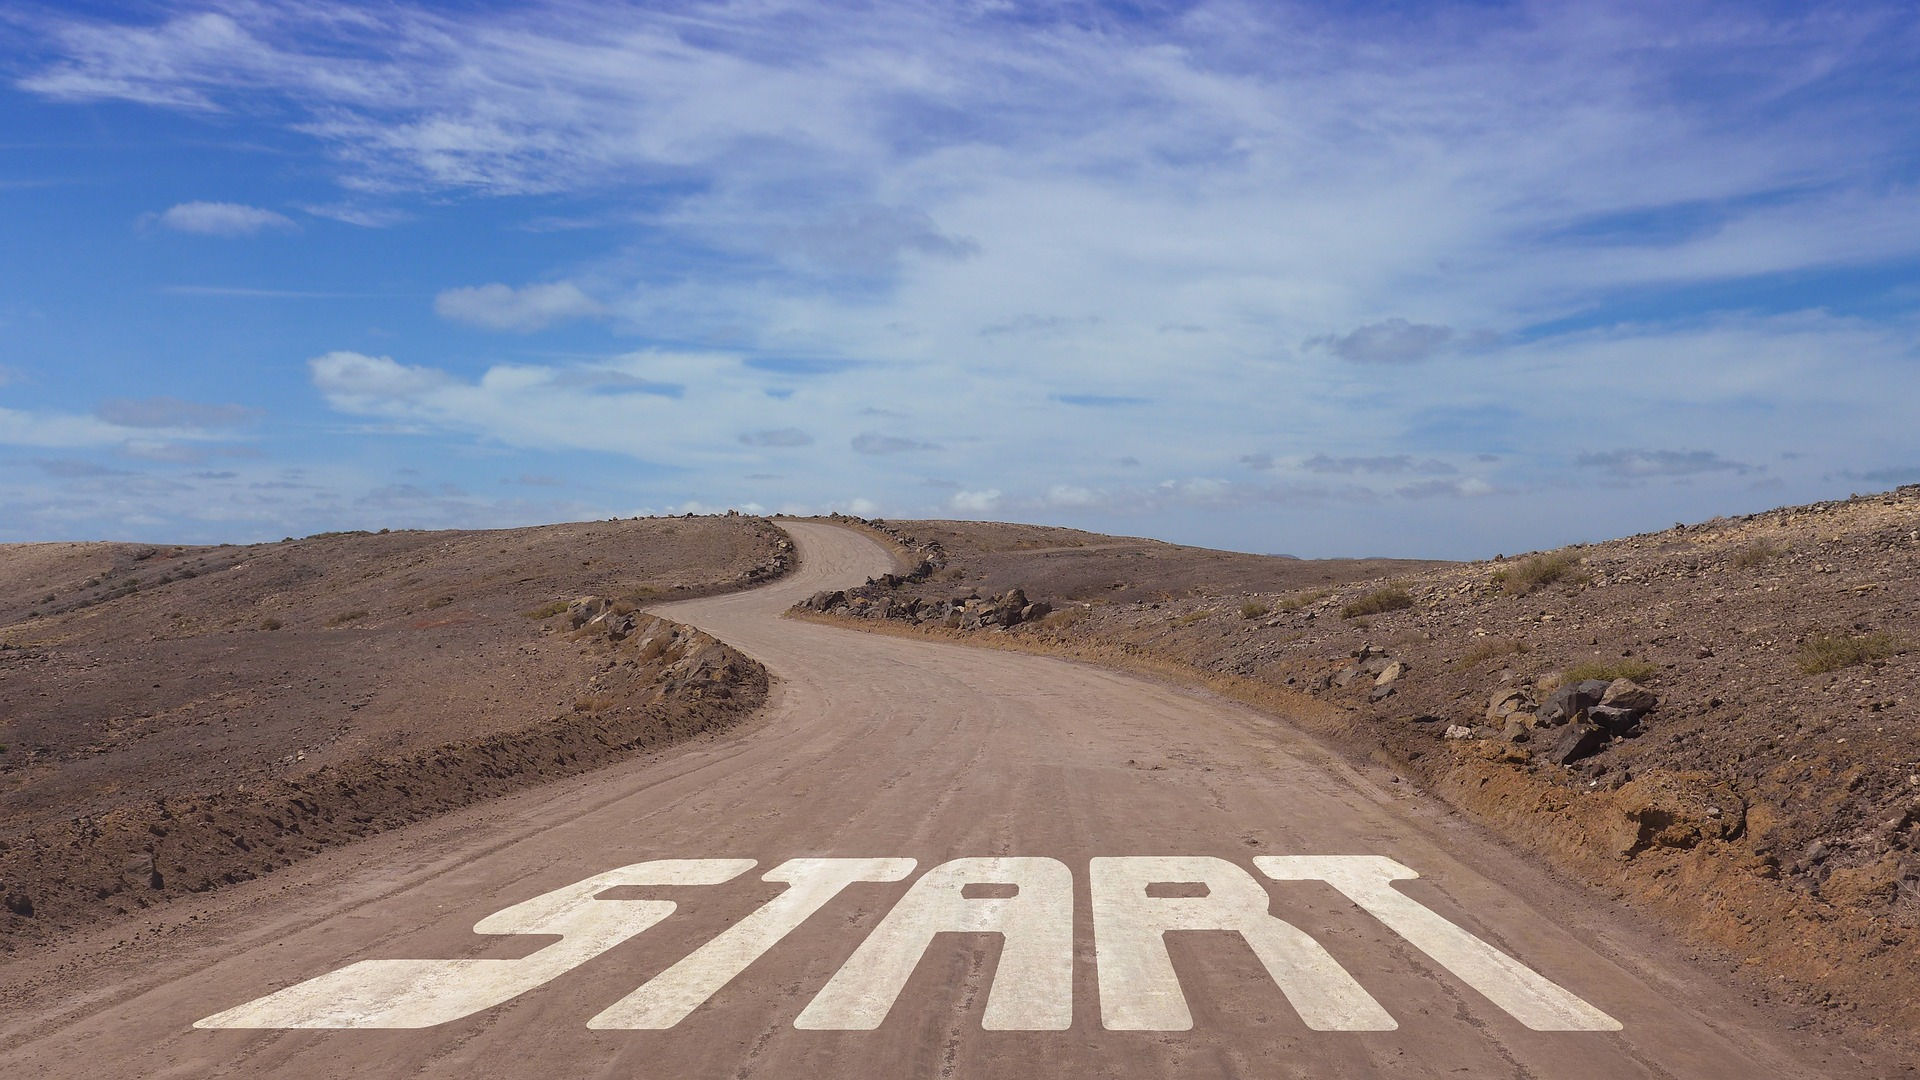 Winding dirt road that goals uphill in a desert area.  At the beginning, "START" is painted on the roadway.